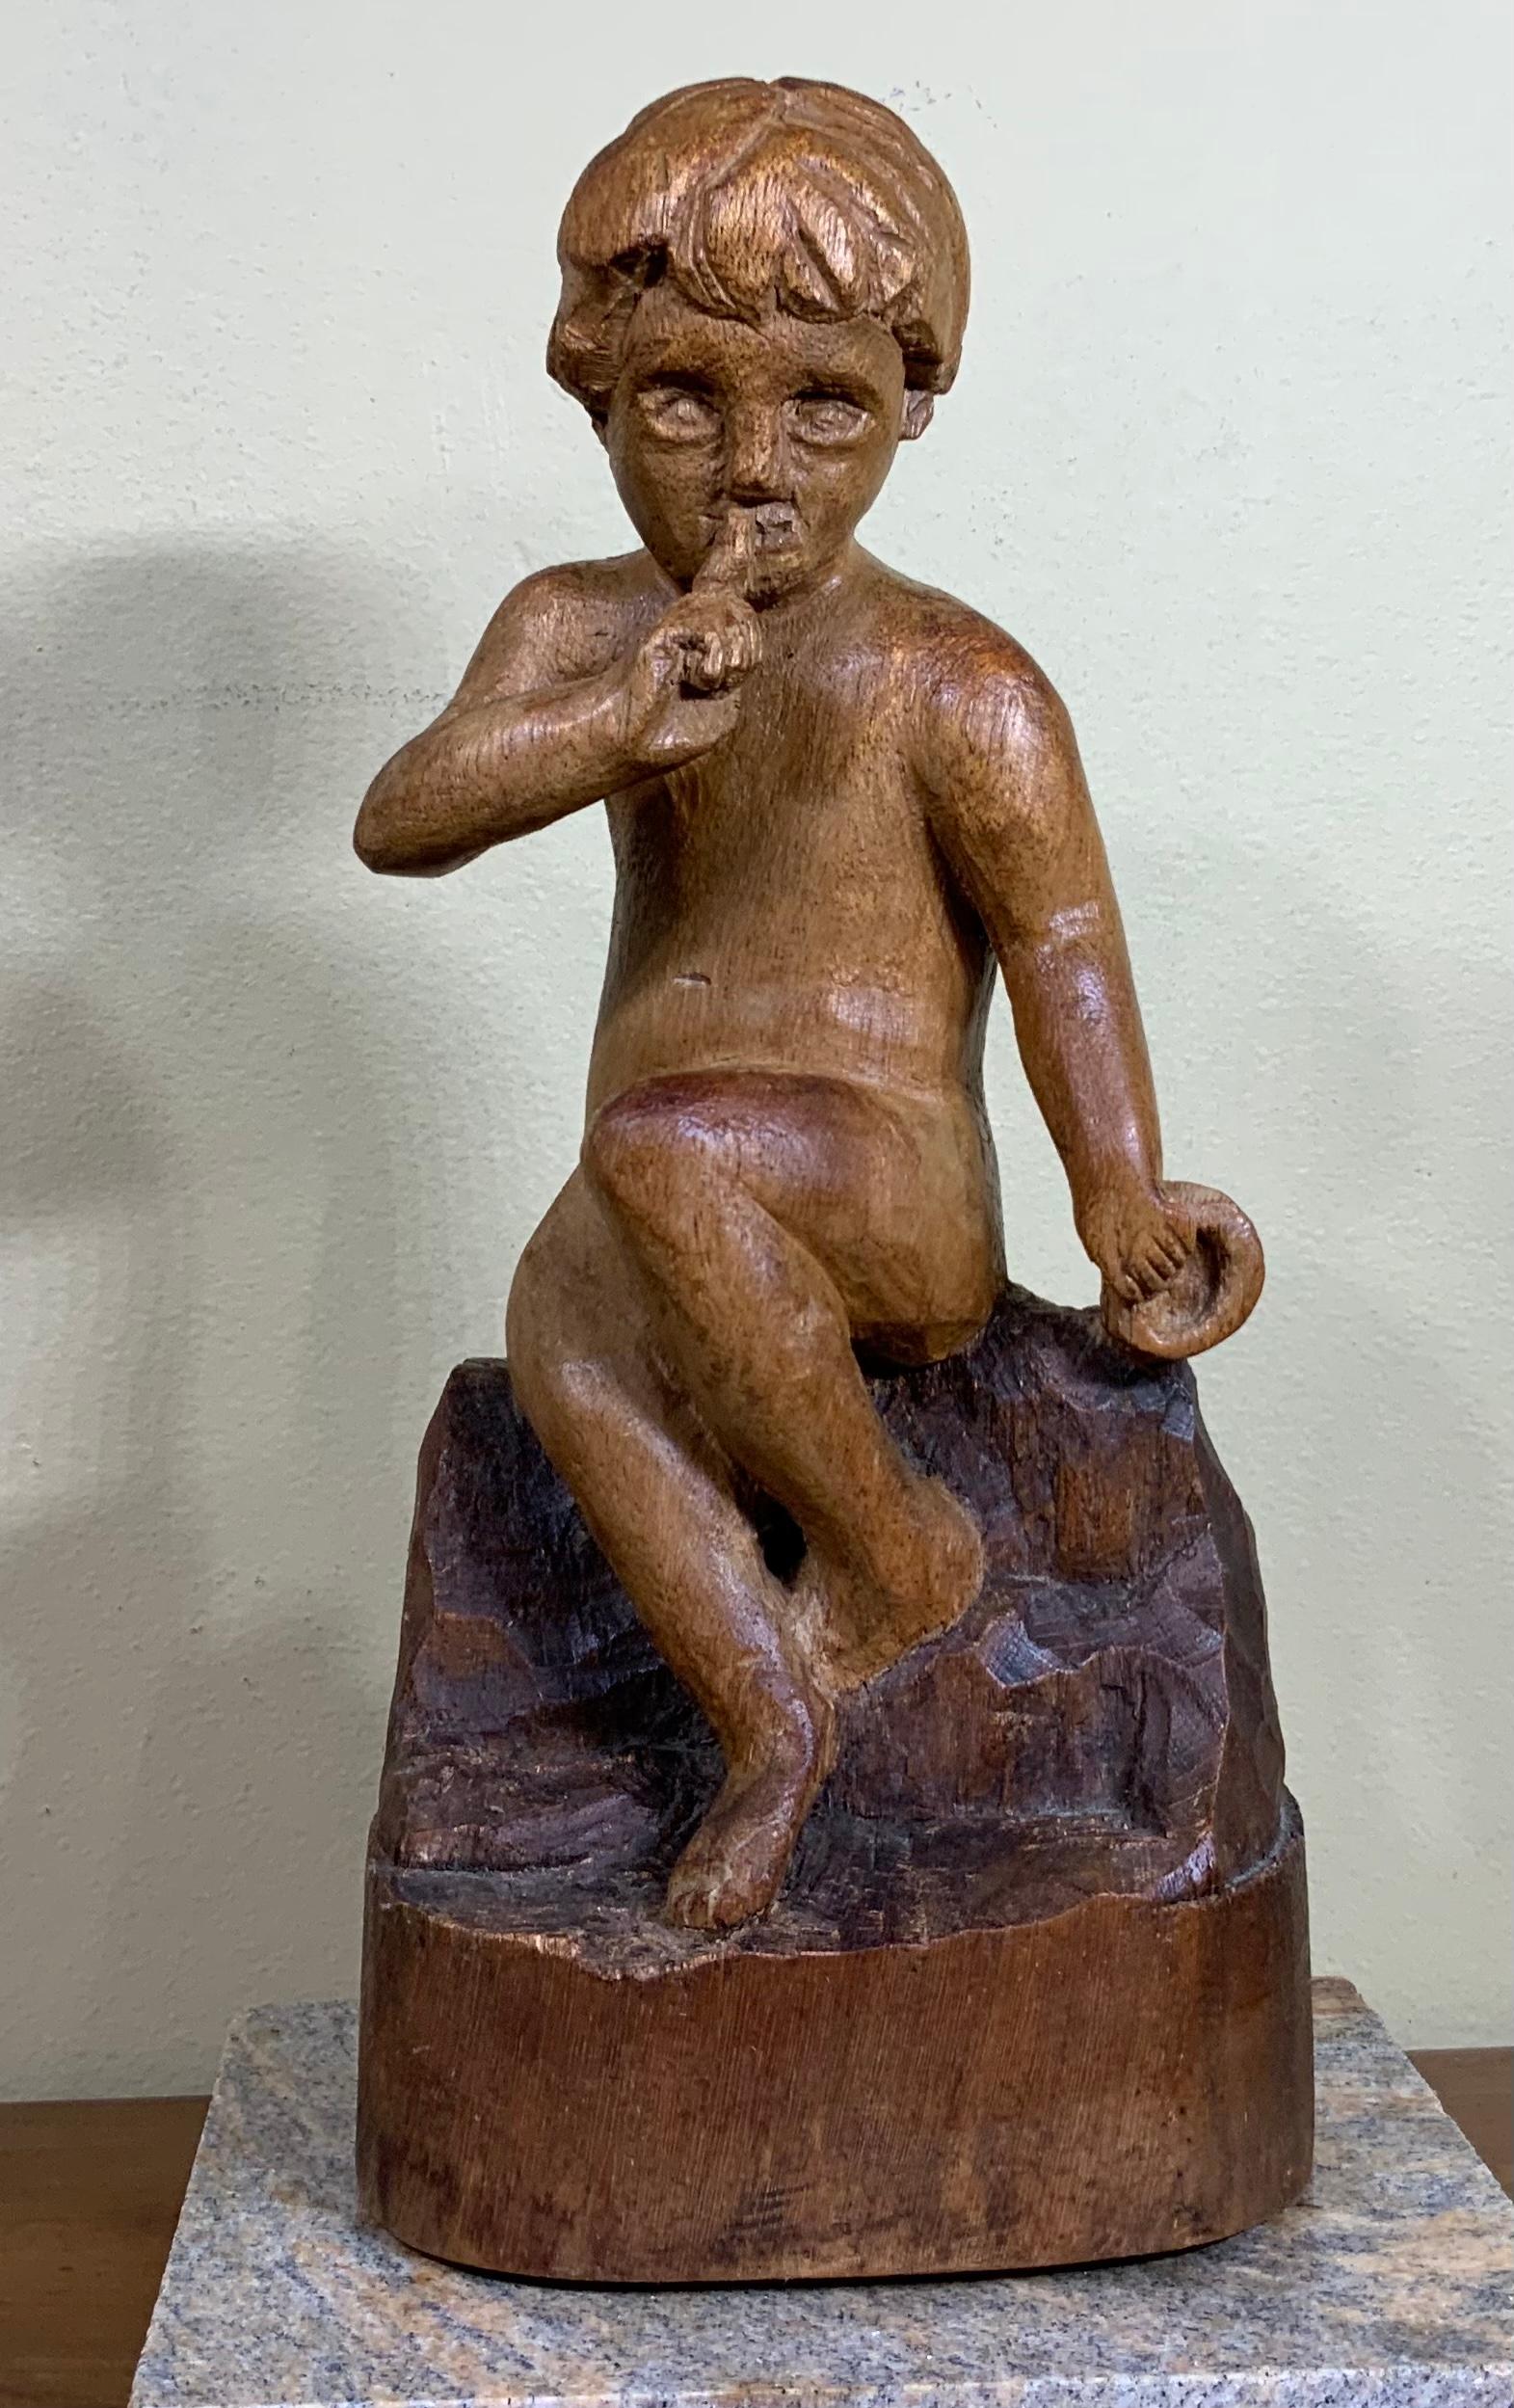 Beautiful fine hand carving made of walnut wood of a sitting kid with intriguing facial expression, pointing finger to the mouth with the expression Quiet !!!.
Mounted on a granite base (include). Sigh in the back by the artist P.H
Base size: 7” x